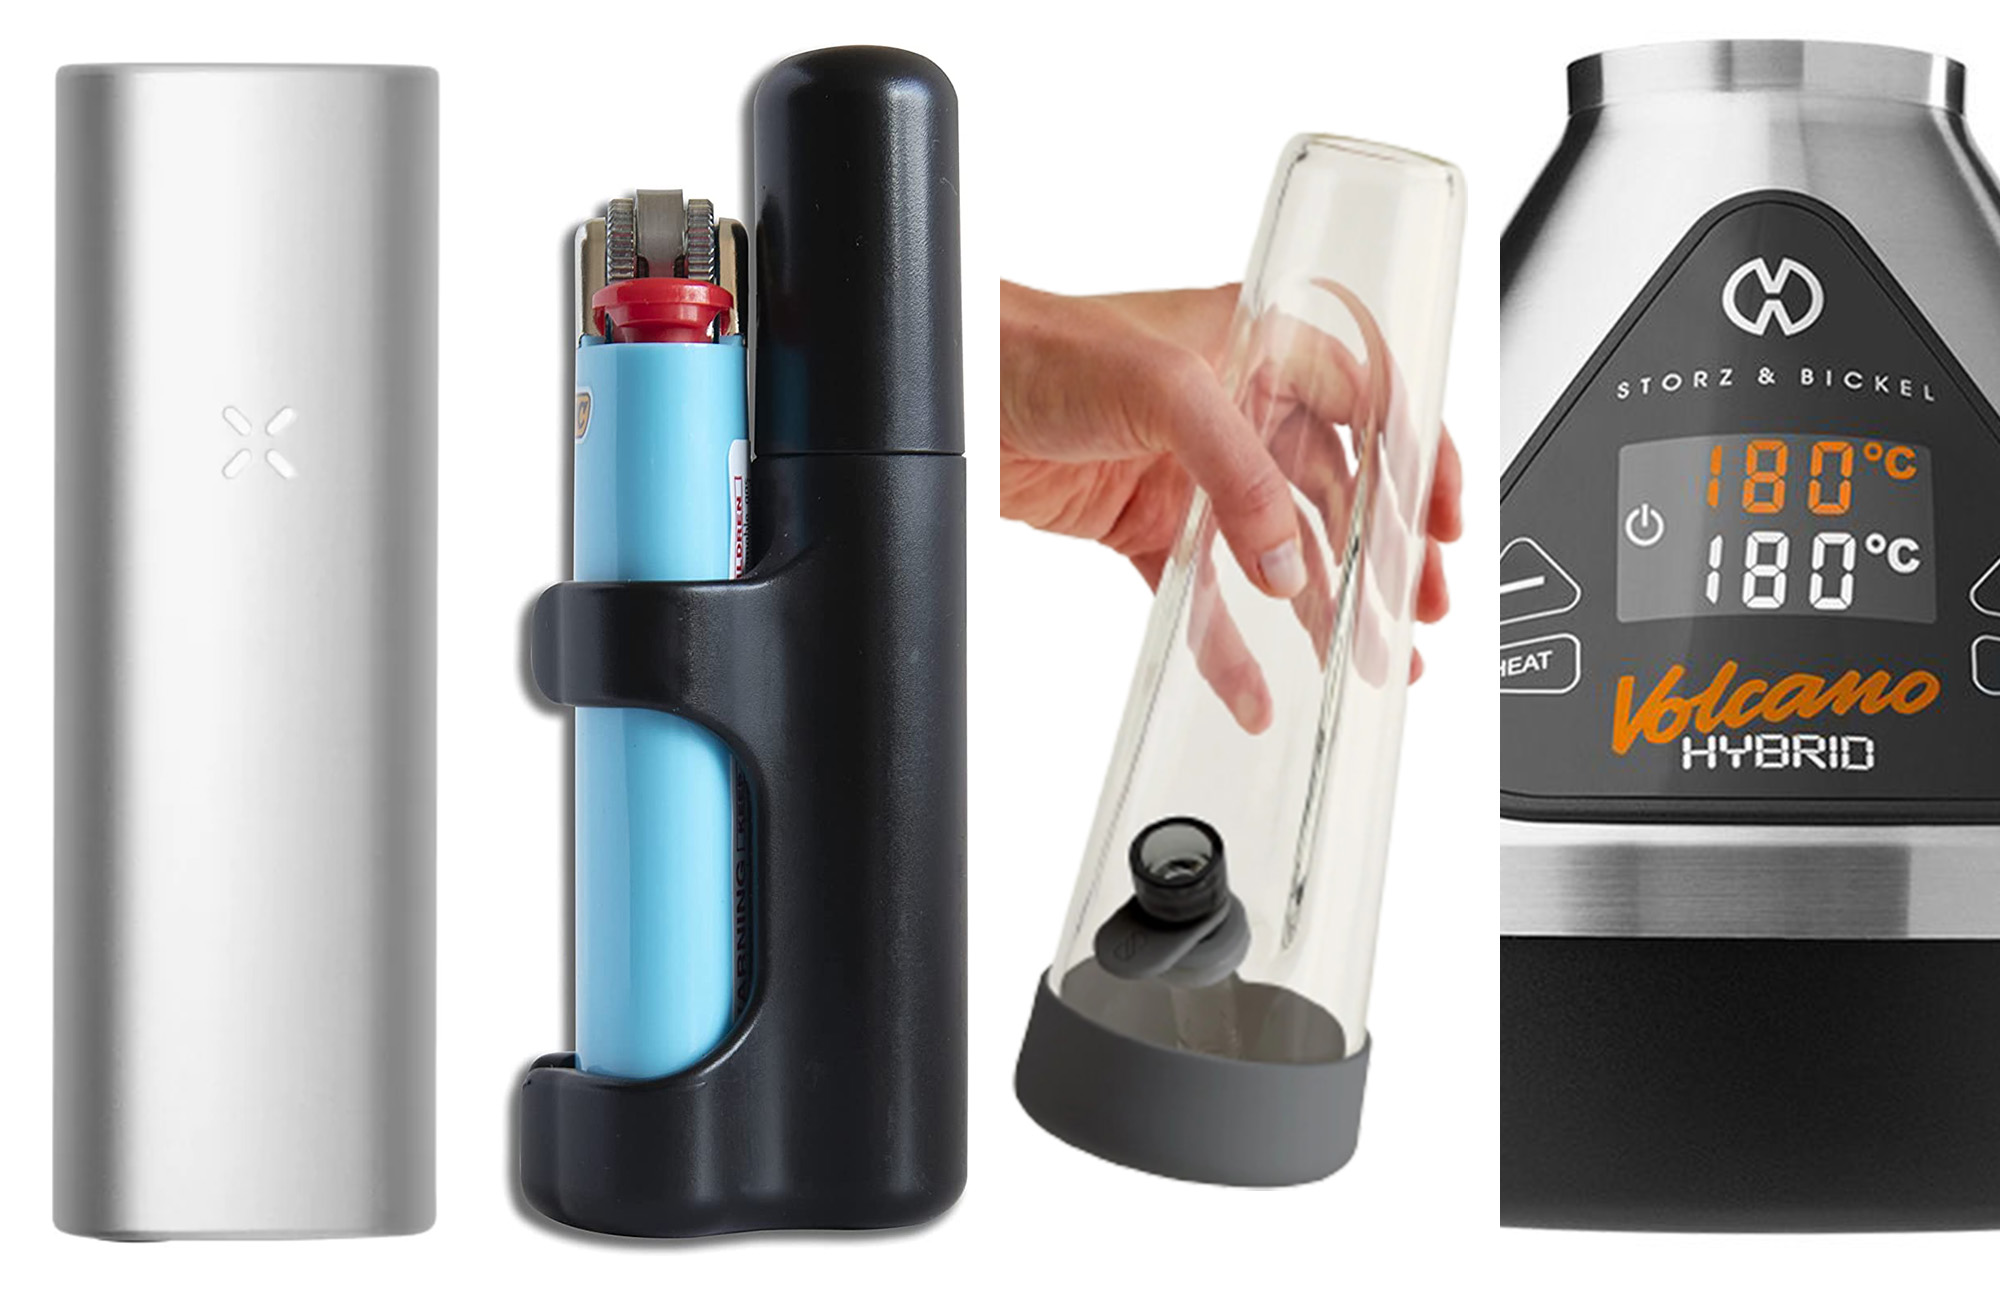 Your Guide to 9 Marijuana Pipes and Smoking Devices